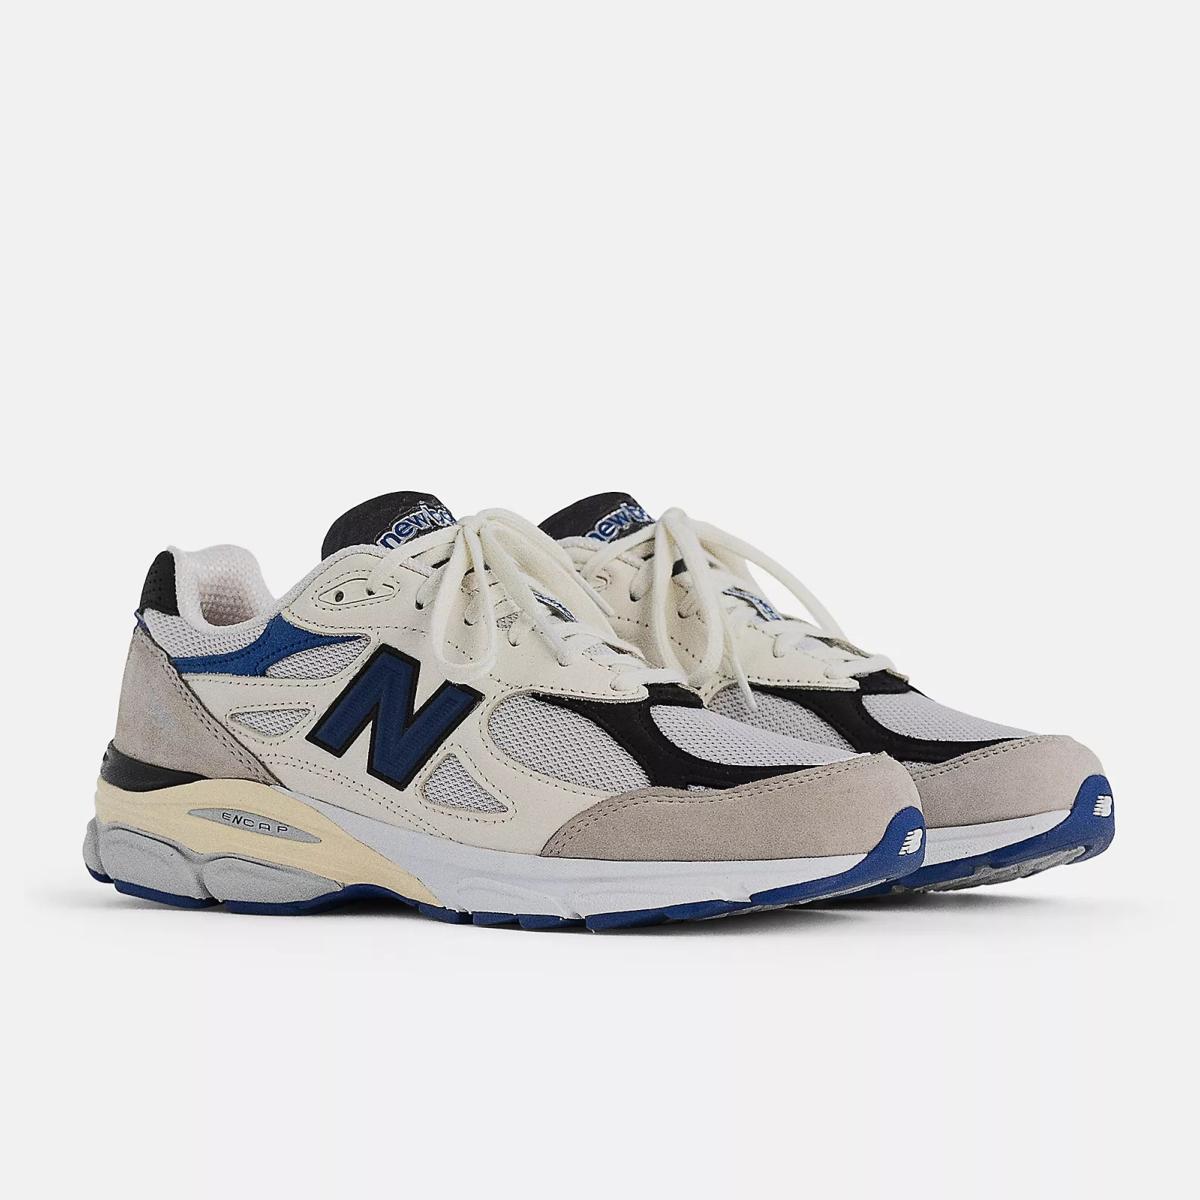  New Balance   Made in USA 990v3  M990WB3